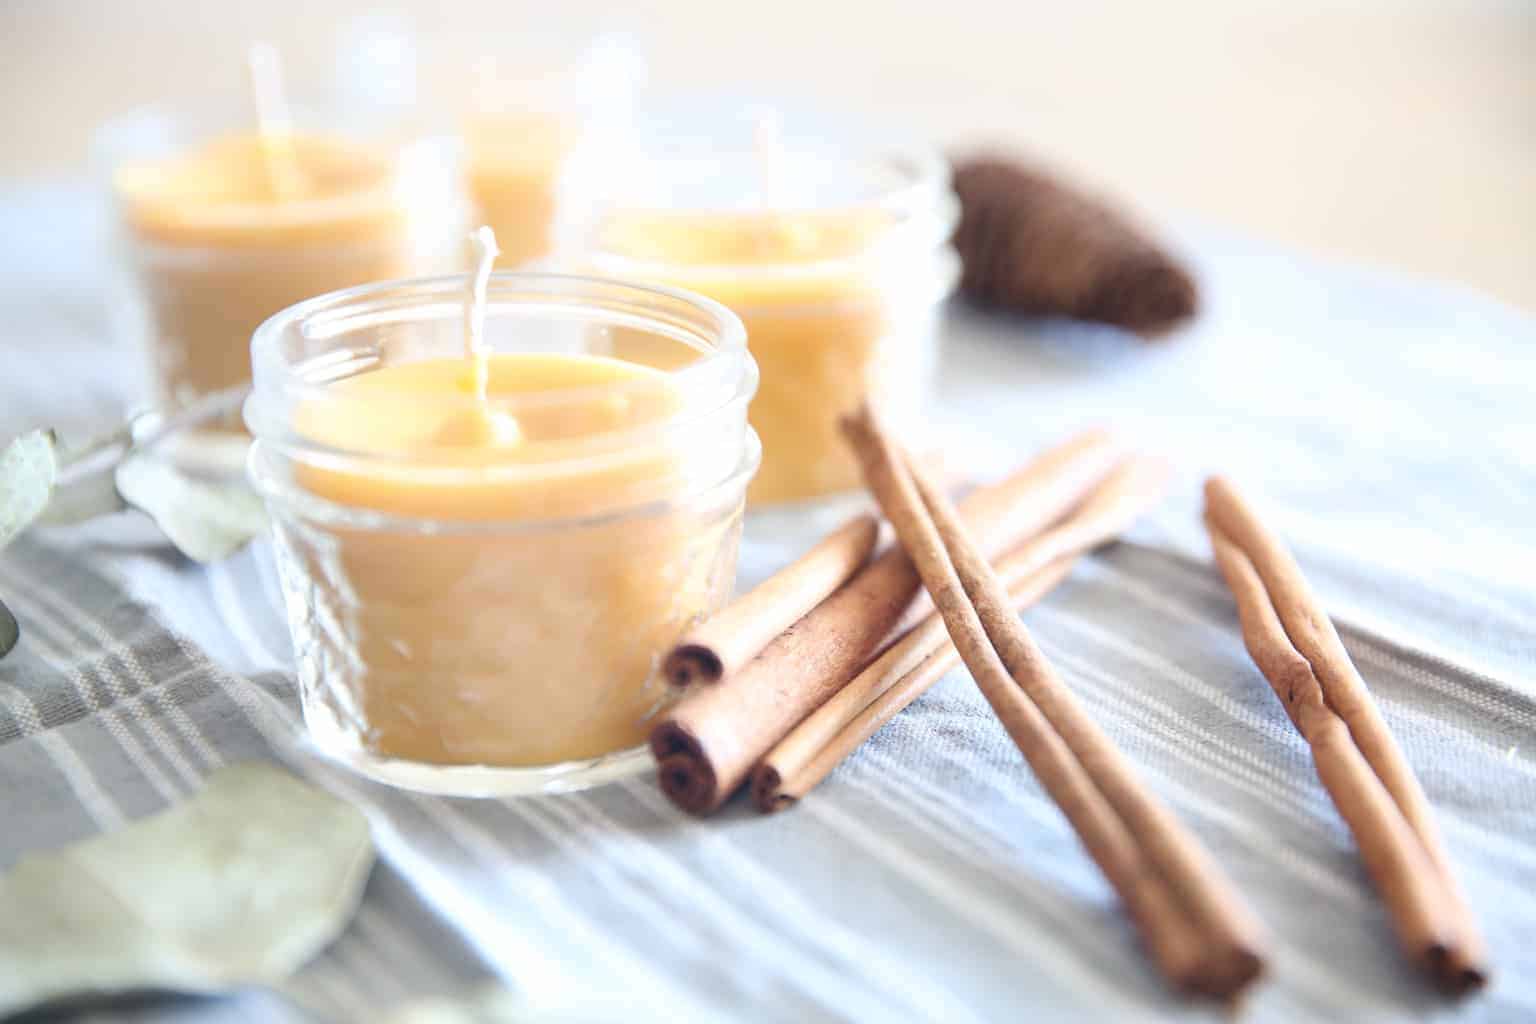 The Easiest Beeswax Candle Recipe  Homemade Gift Ideas - Our Oily House